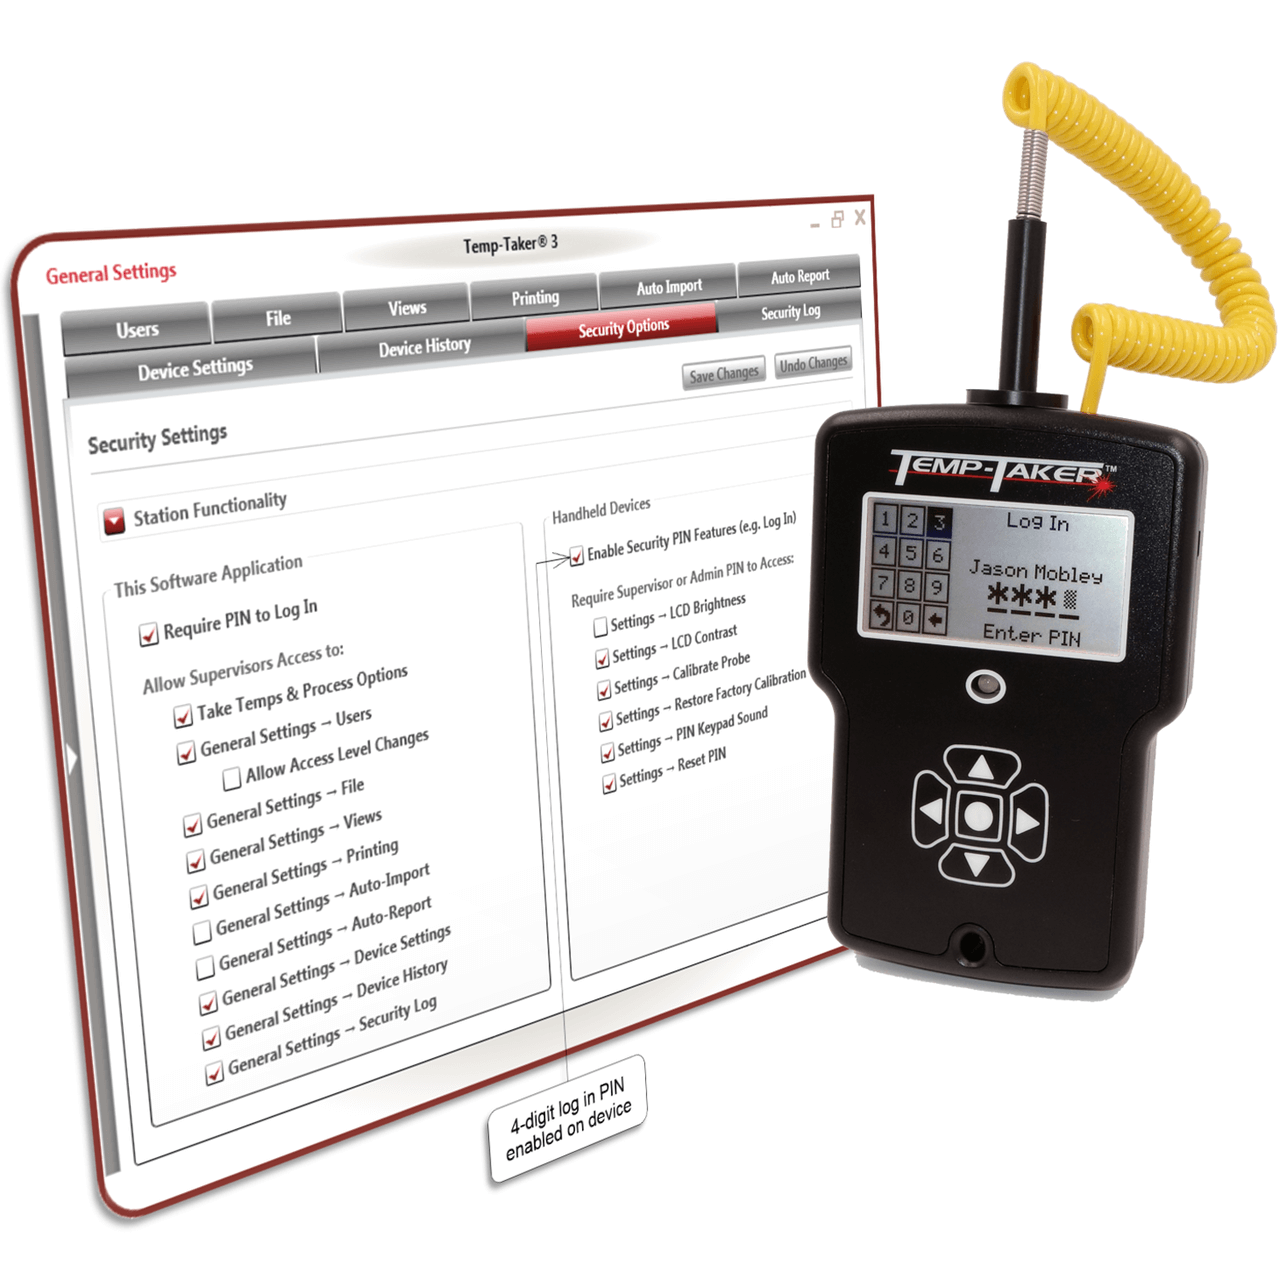 AUTOMATING HACCP PLANS SINCE 2006  Temp-Taker® 4 takes HACCP management to a whole new level by enhancing food safety while minimizing human errors.  Stop handwriting temperatures and checklists and start utilizing the power of Temp-Taker® 4.